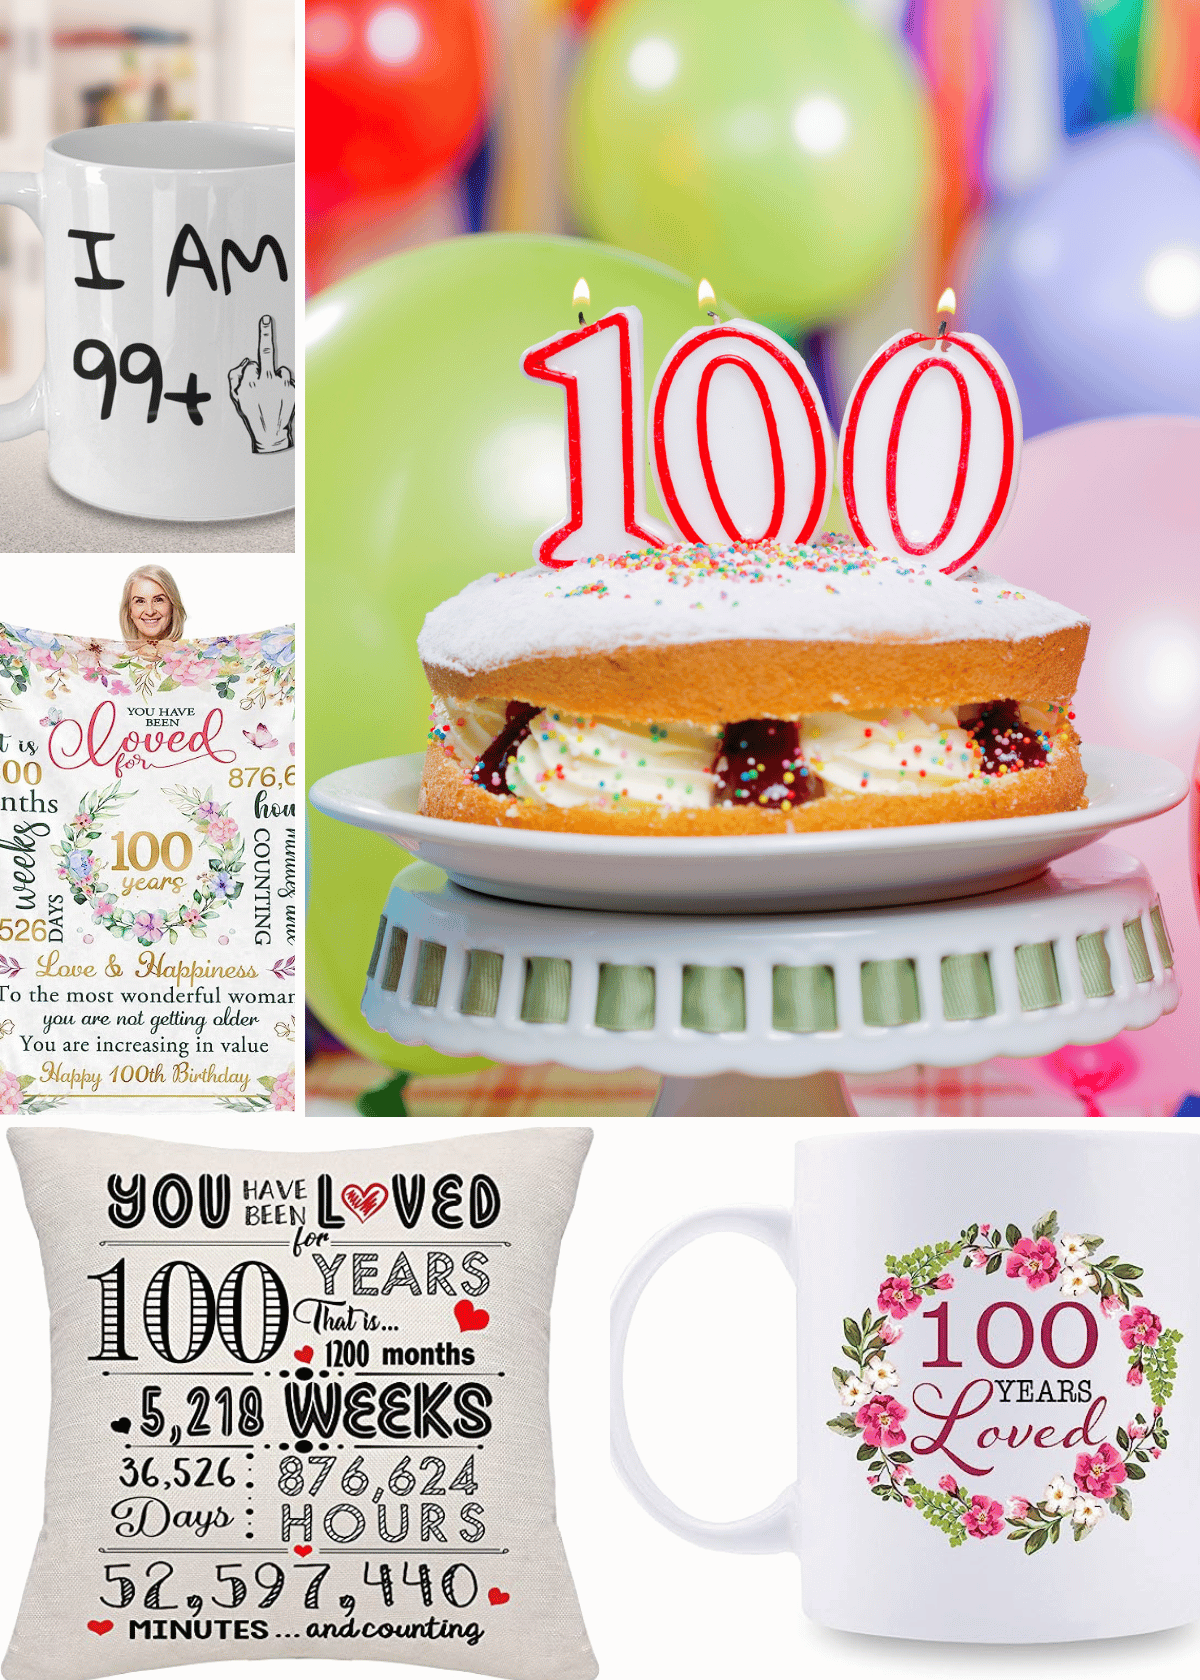 5 Remarkable Gift Ideas for 100th Birthday: Celebrating a Century of Life